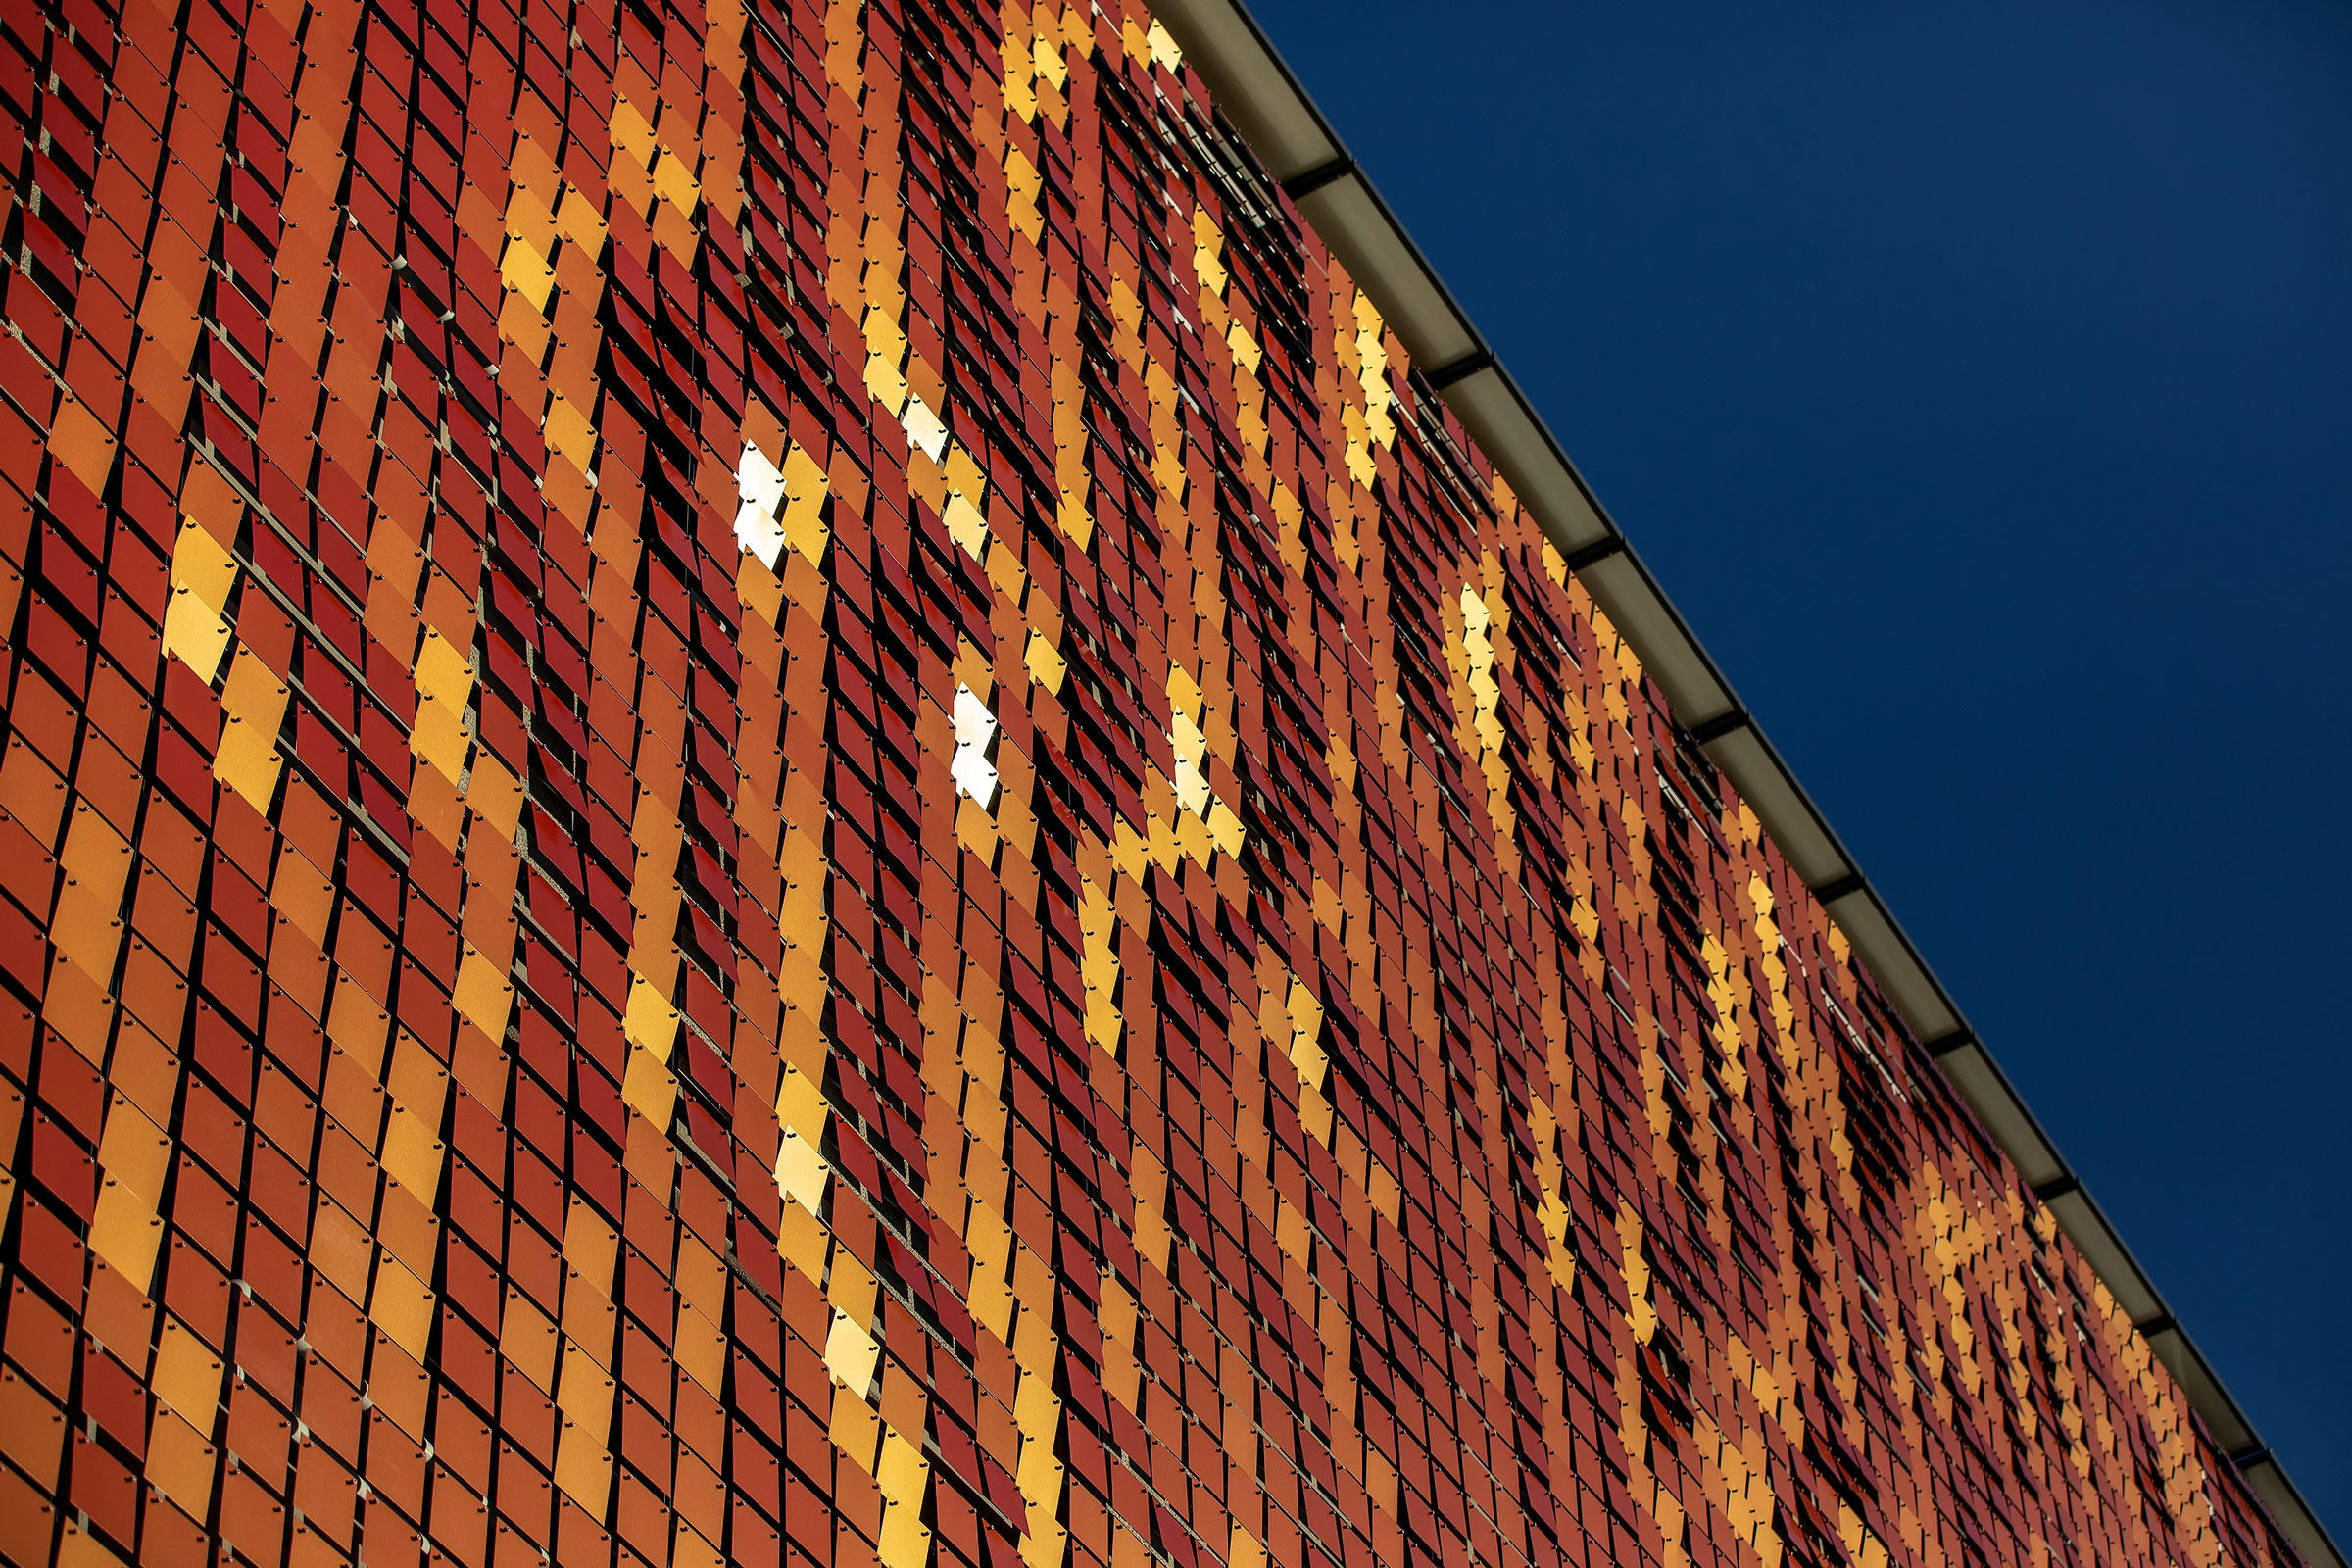 Why Designing with Metal Panels Makes for More Dynamic Buildings